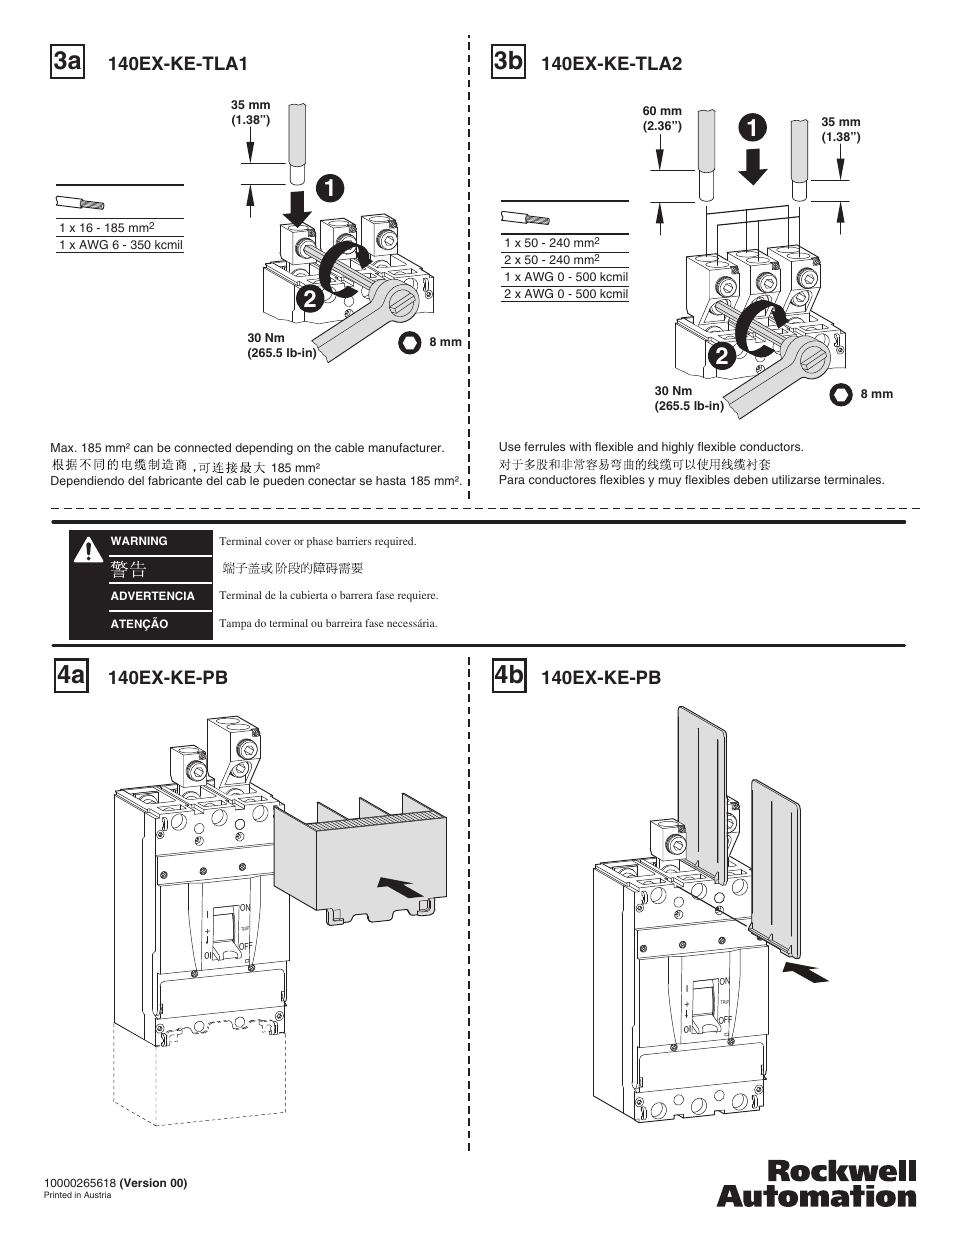 4a 3b 3a 4b | Rockwell Automation 140G-Rx Installation Instruction-140G-R User Manual | Page 2 / 2